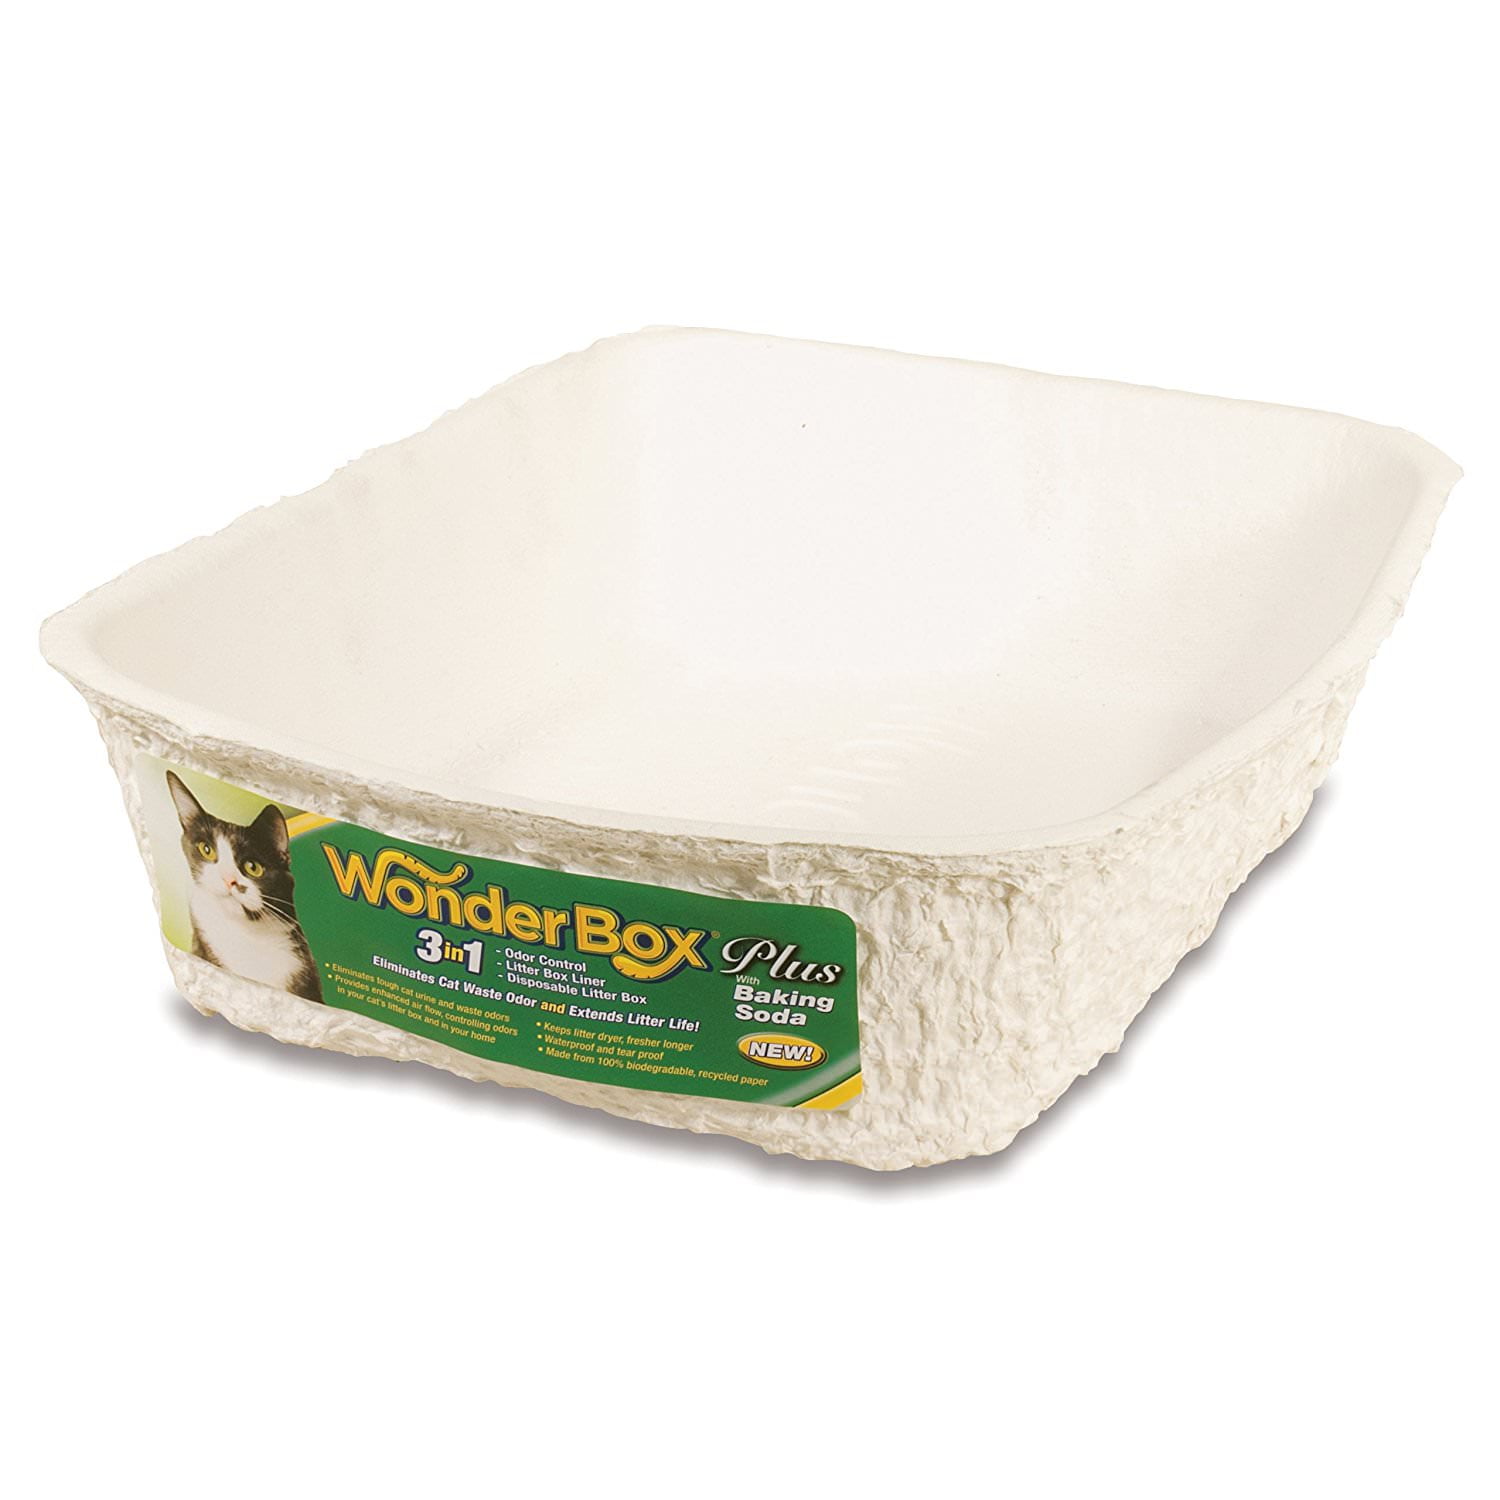 Wonderbox Disposable Litter Box 1 Count, 2in1 Disposable Cat Litter